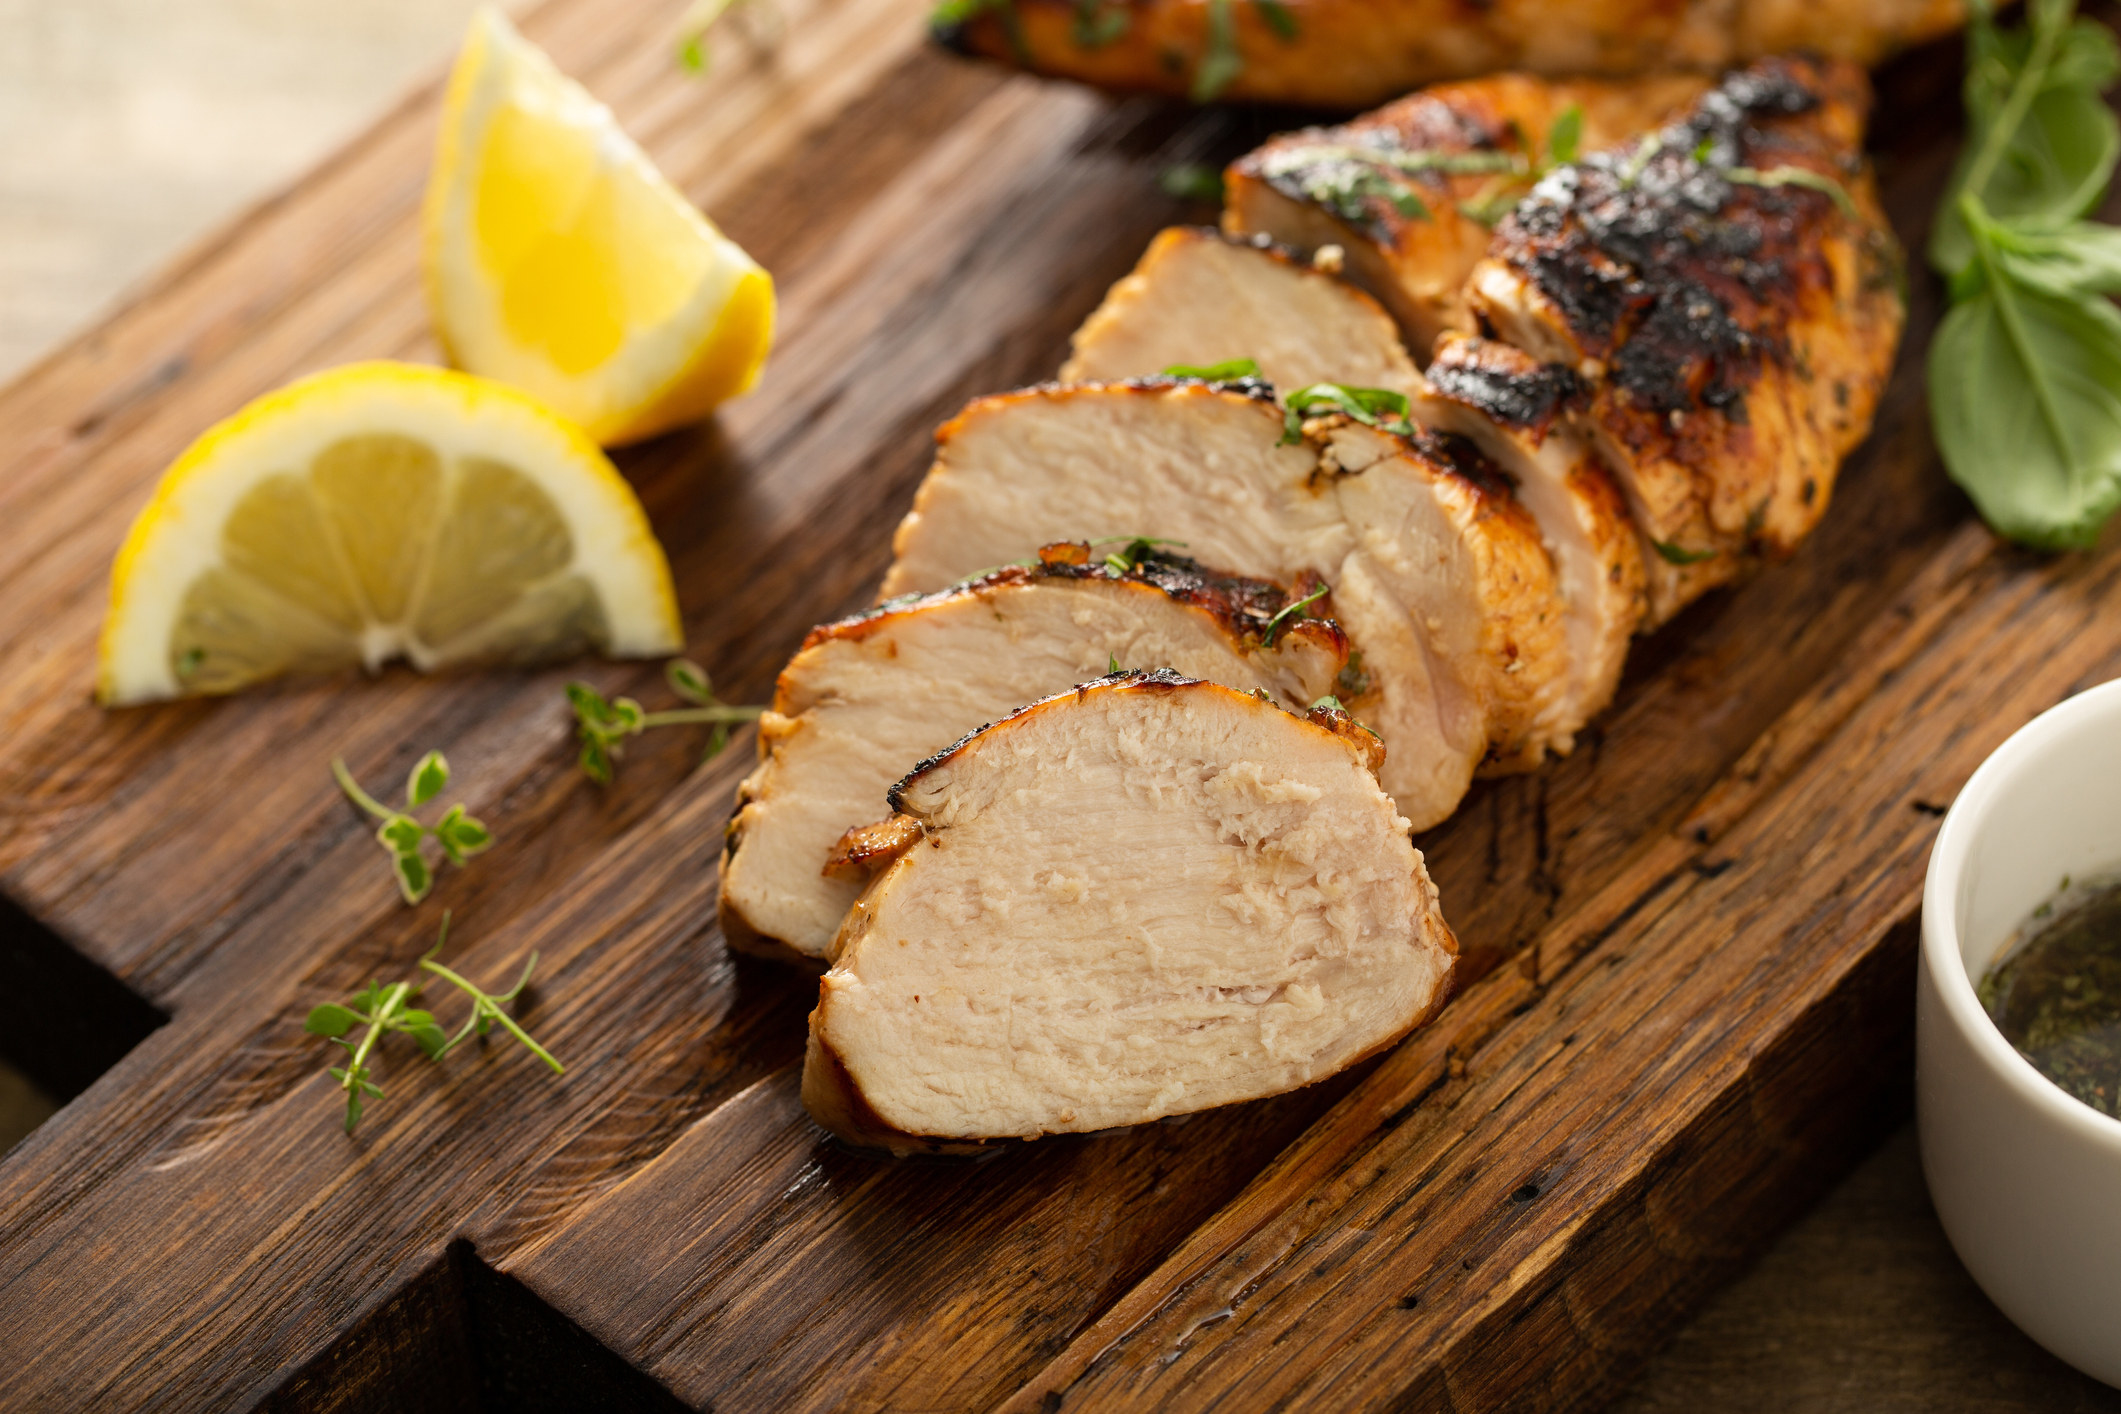 Balsamic grilled chicken breast with fresh herbs sliced on a rustic wooden board.